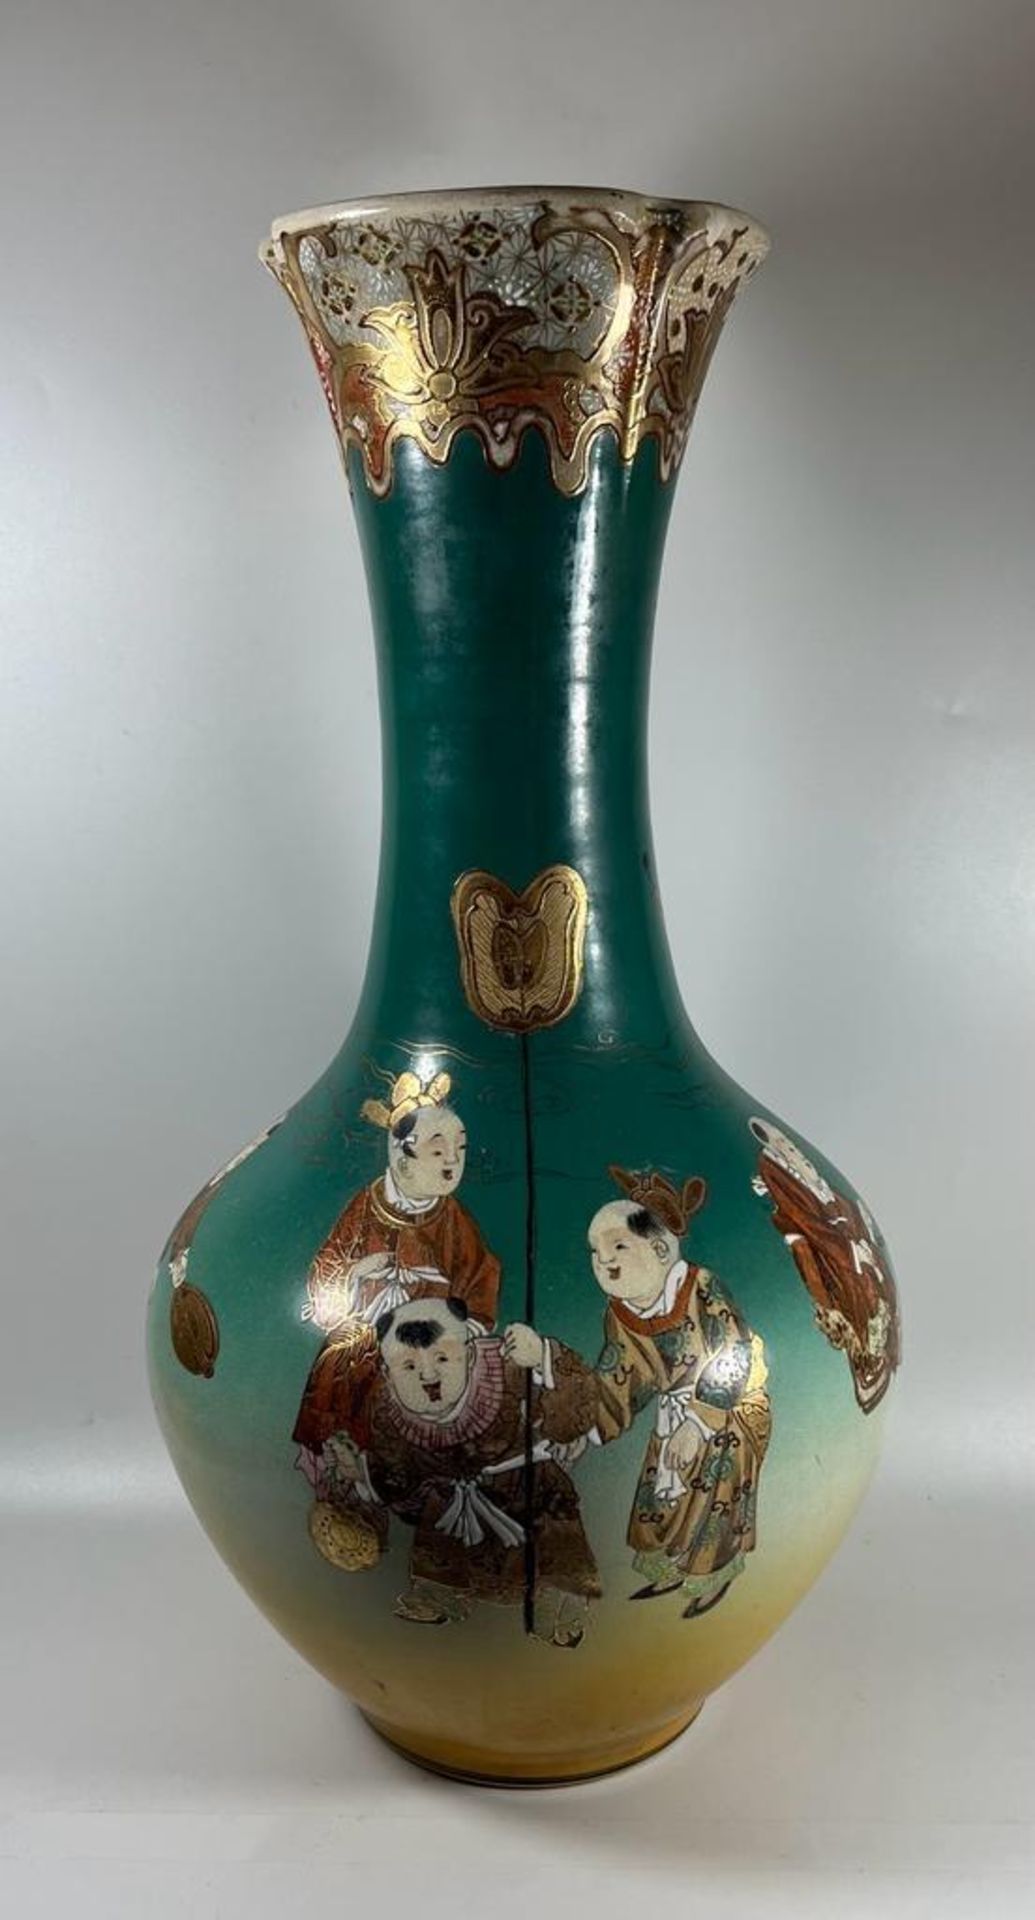 A HUGE PAIR OF JAPANESE MEIJI PERIOD (1868-1912) SATSUMA VASES WITH FIGURES DESIGN, HEIGHT 49CM - Image 6 of 8